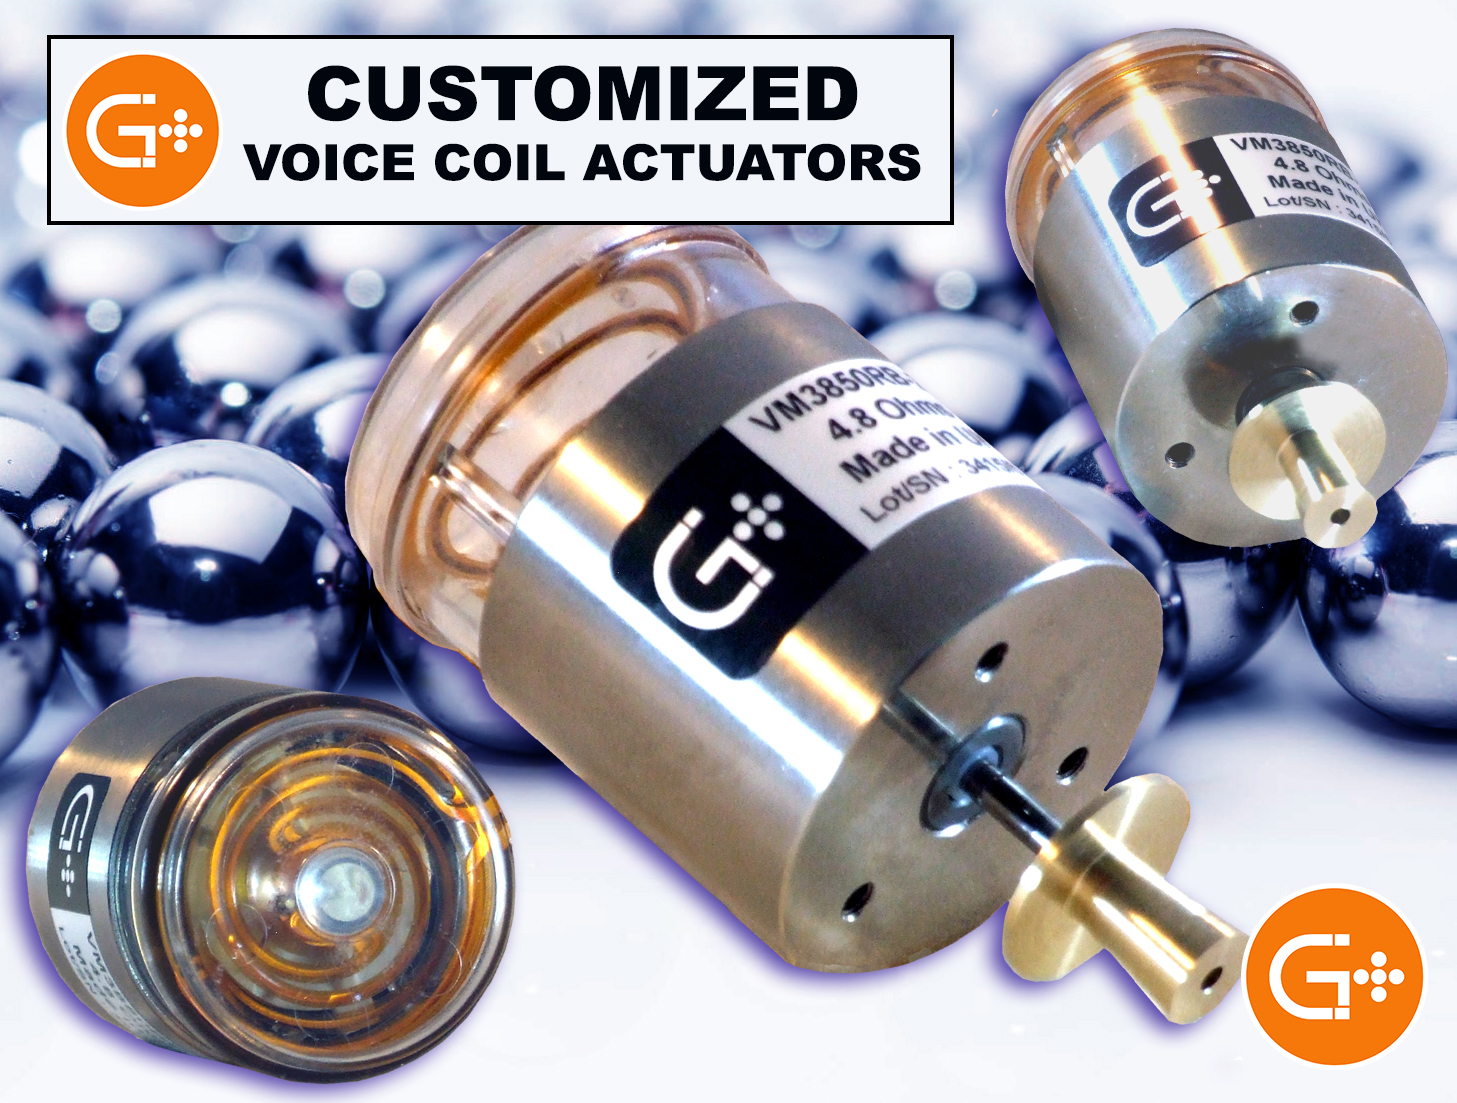 Customized Voice Coil Actuators by Geeplus